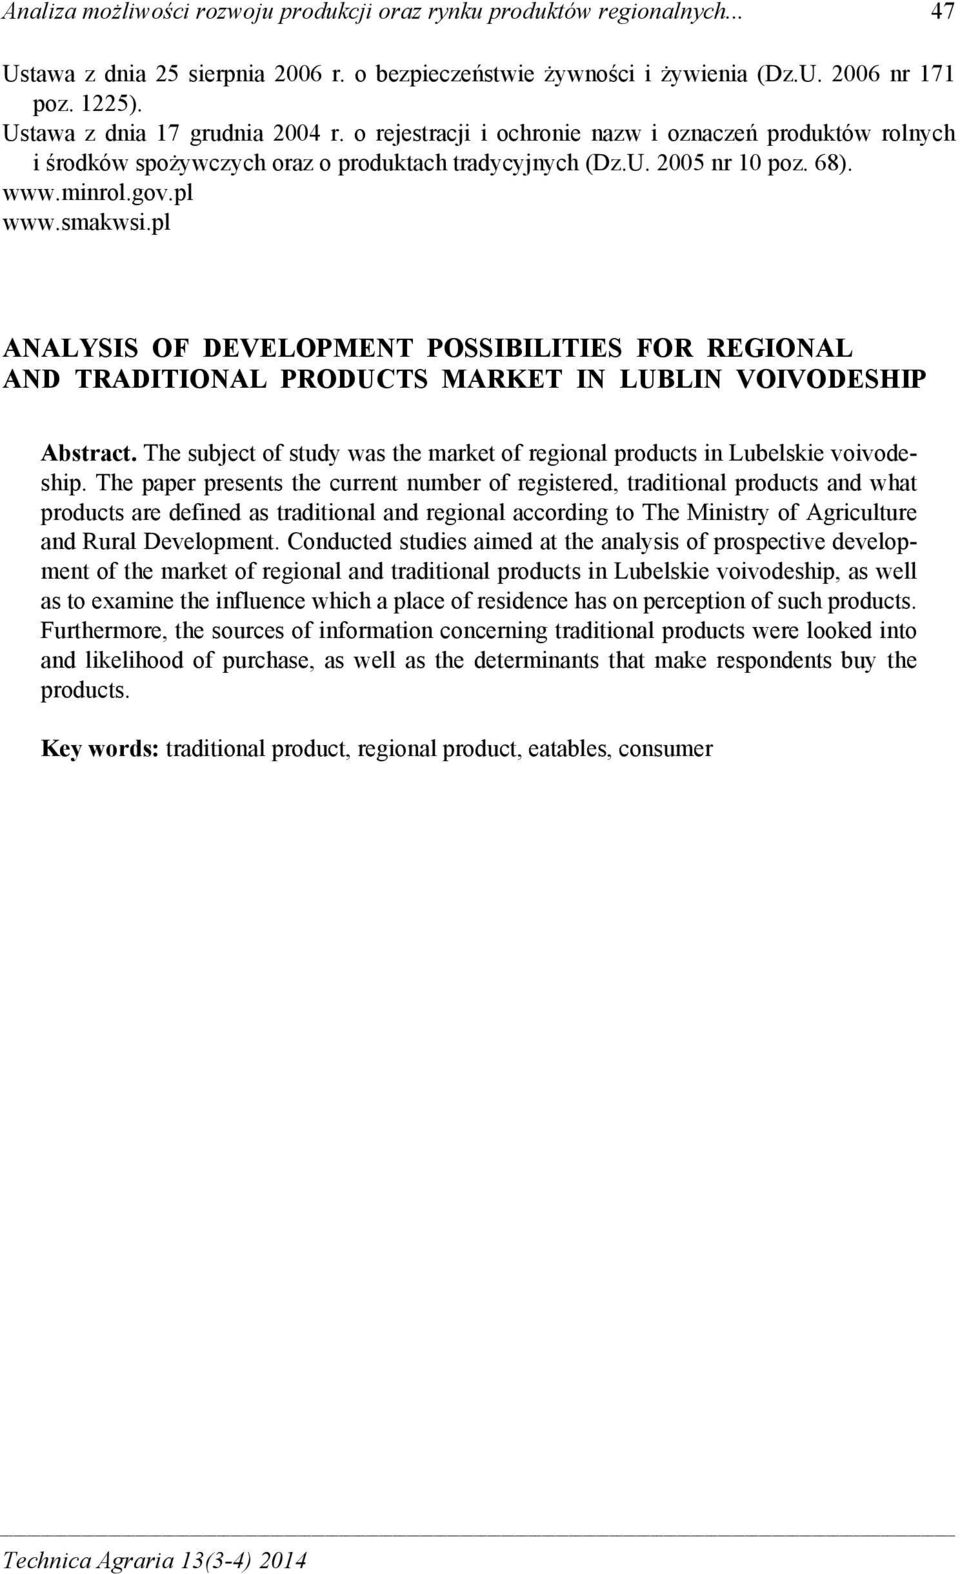 smakwsi.pl ANALYSIS OF DEVELOPMENT POSSIBILITIES FOR REGIONAL AND TRADITIONAL PRODUCTS MARKET IN LUBLIN VOIVODESHIP Abstract.